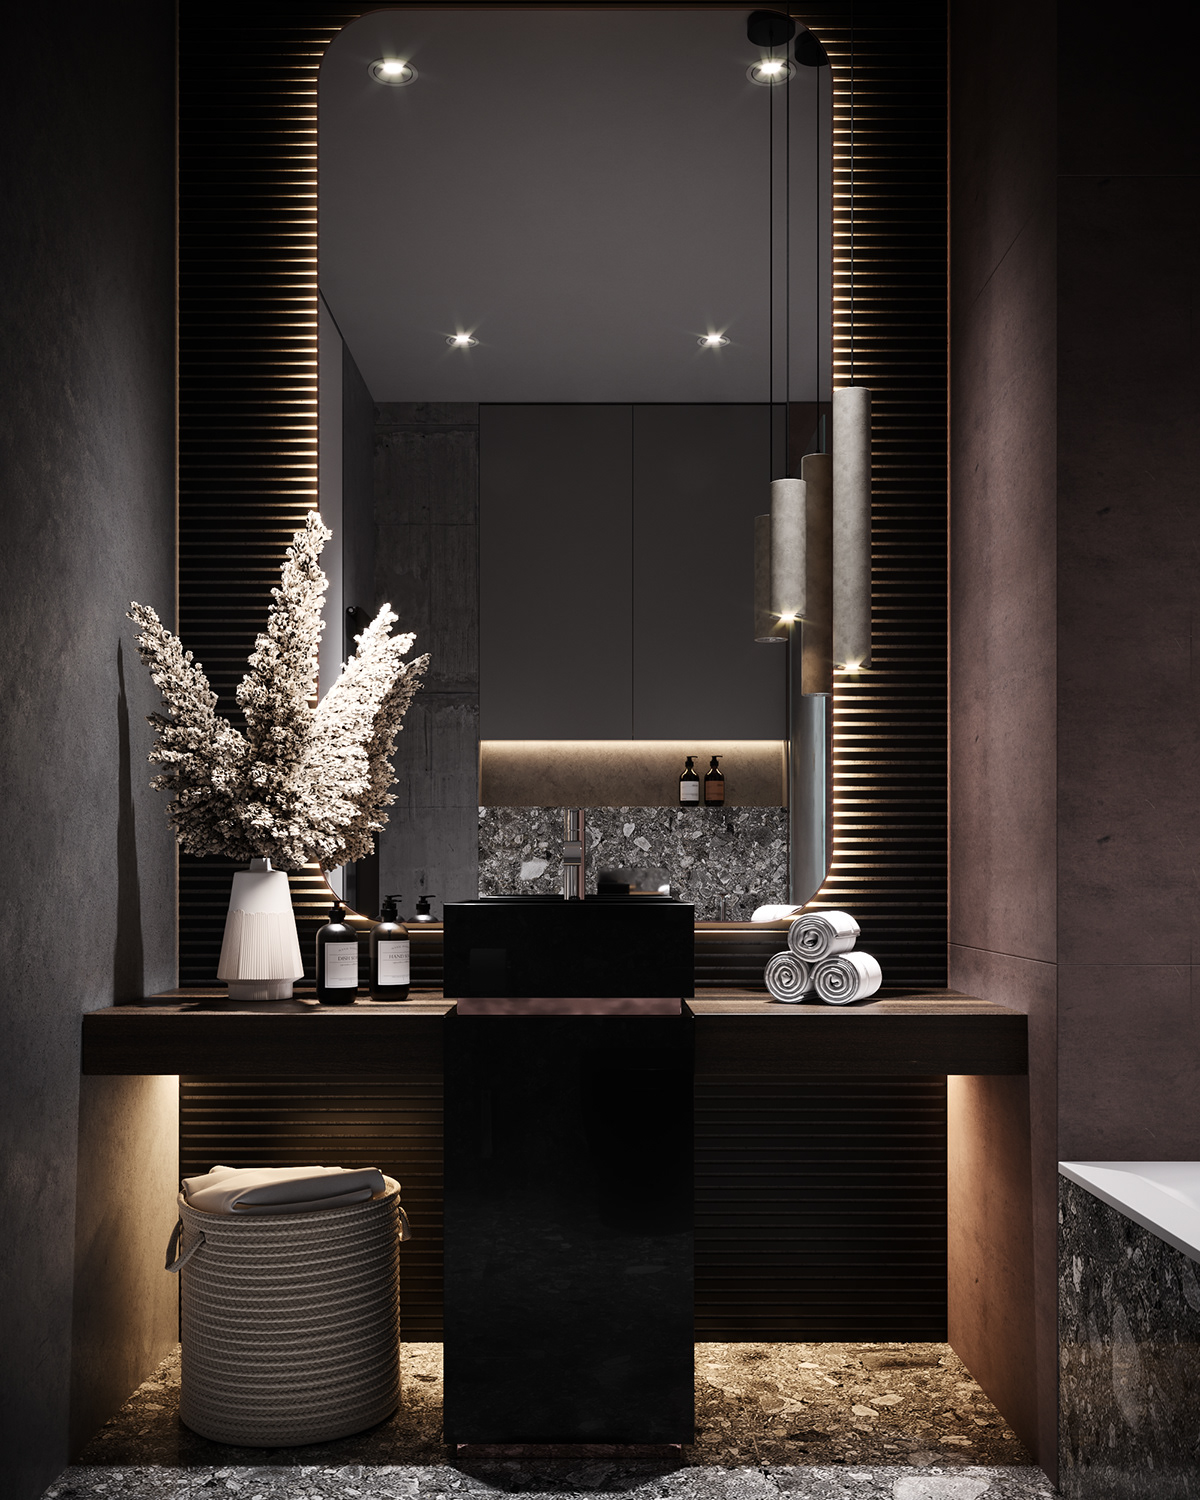 The bathroom looks mysterious with interior in black and different shapes.